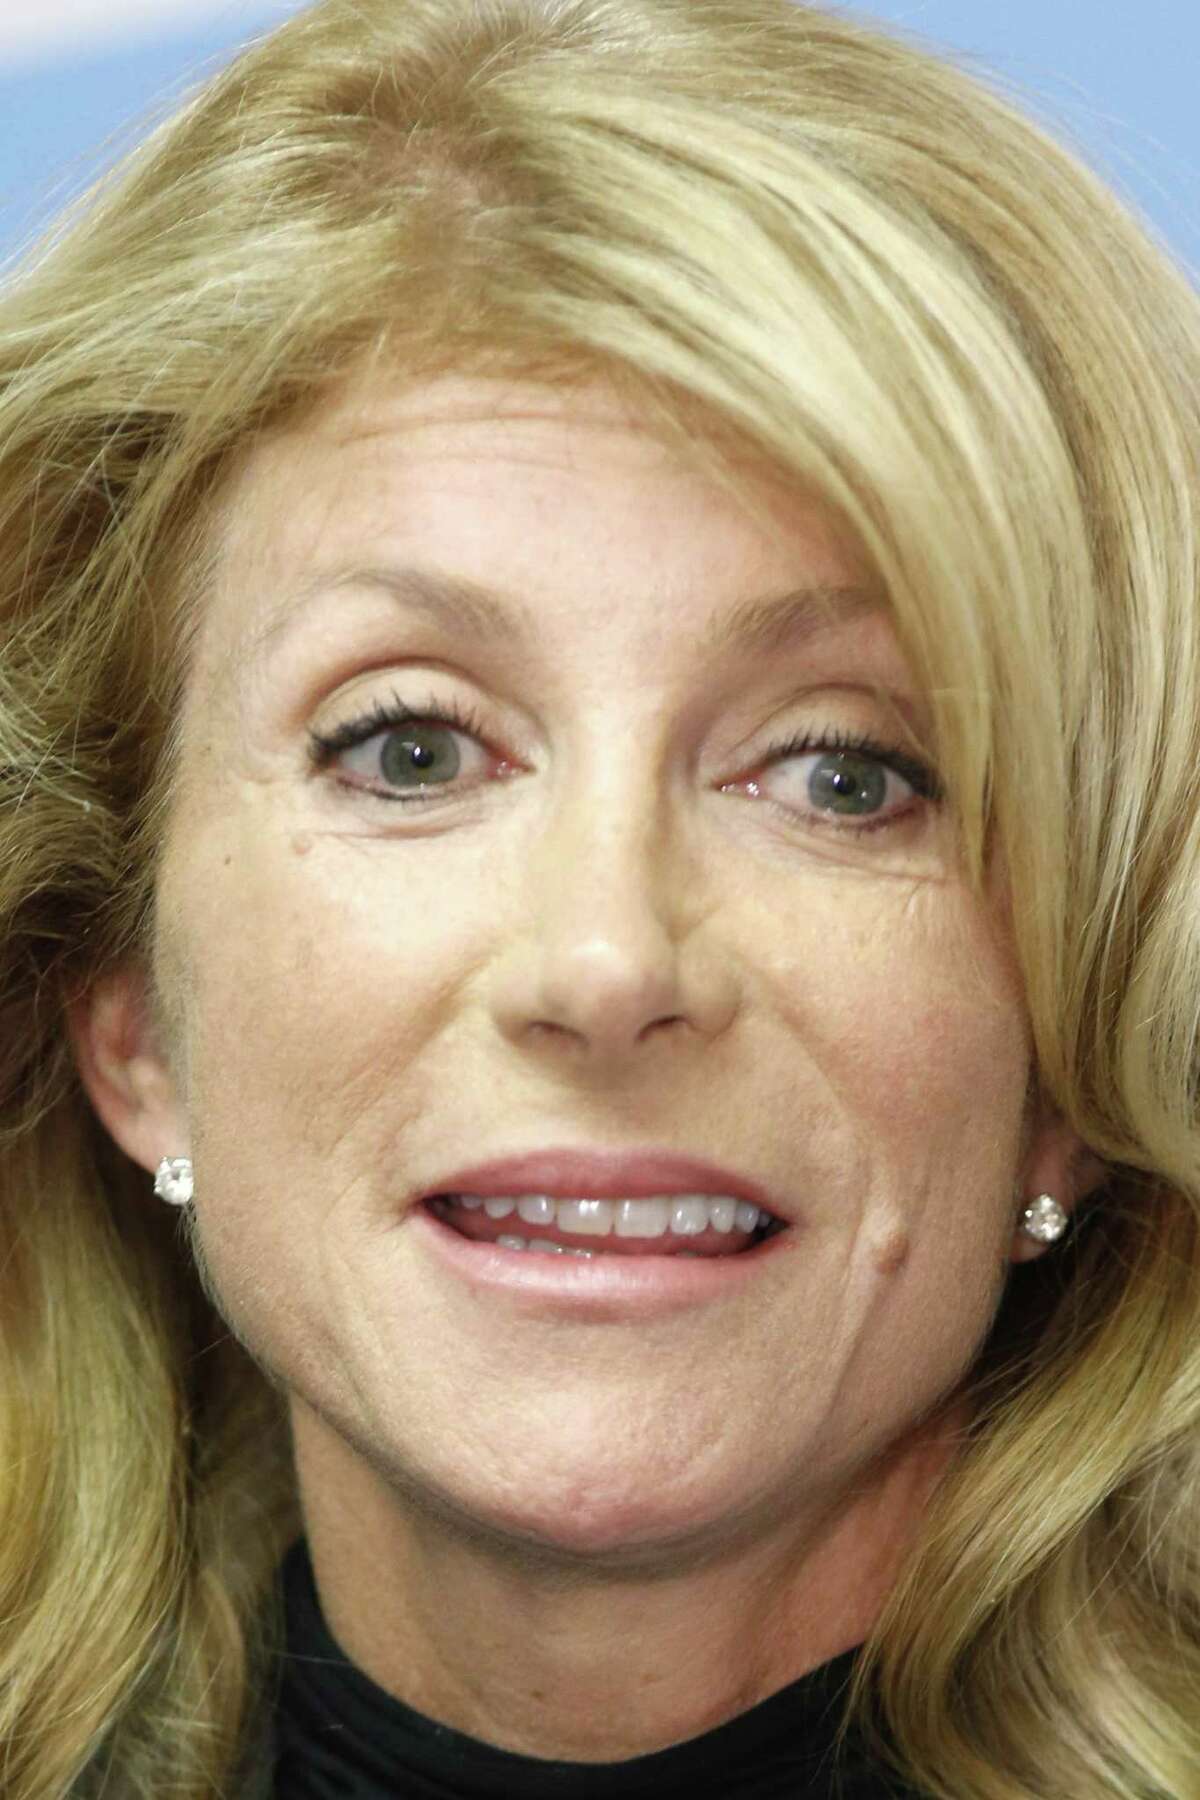 State Sen. Wendy Davis is the Democratic nominee for governor of Texas.